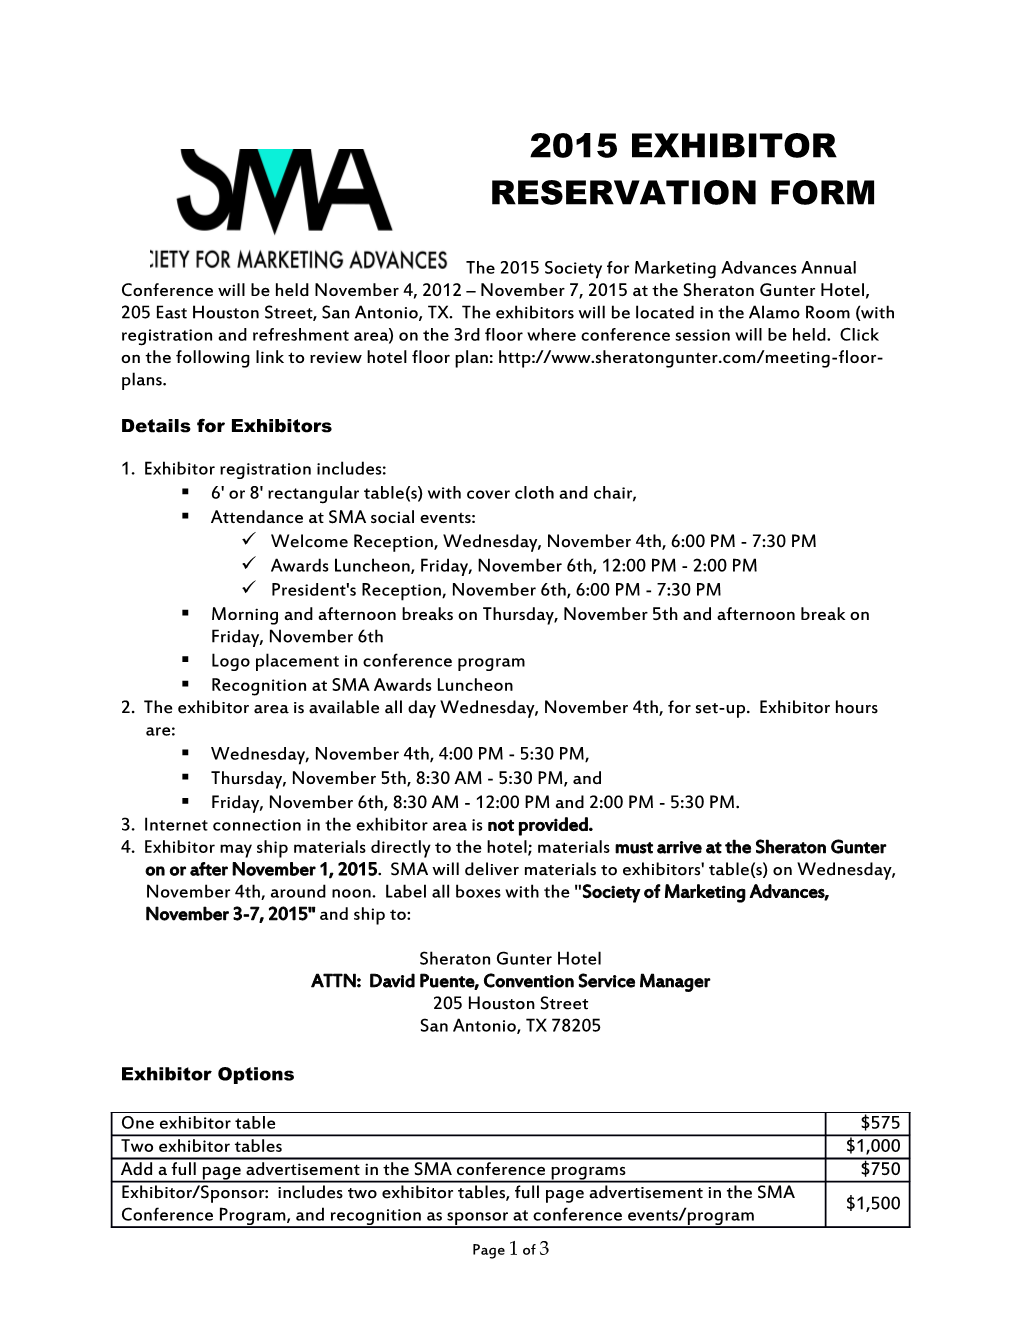 2015 Exhibitor Reservation Form